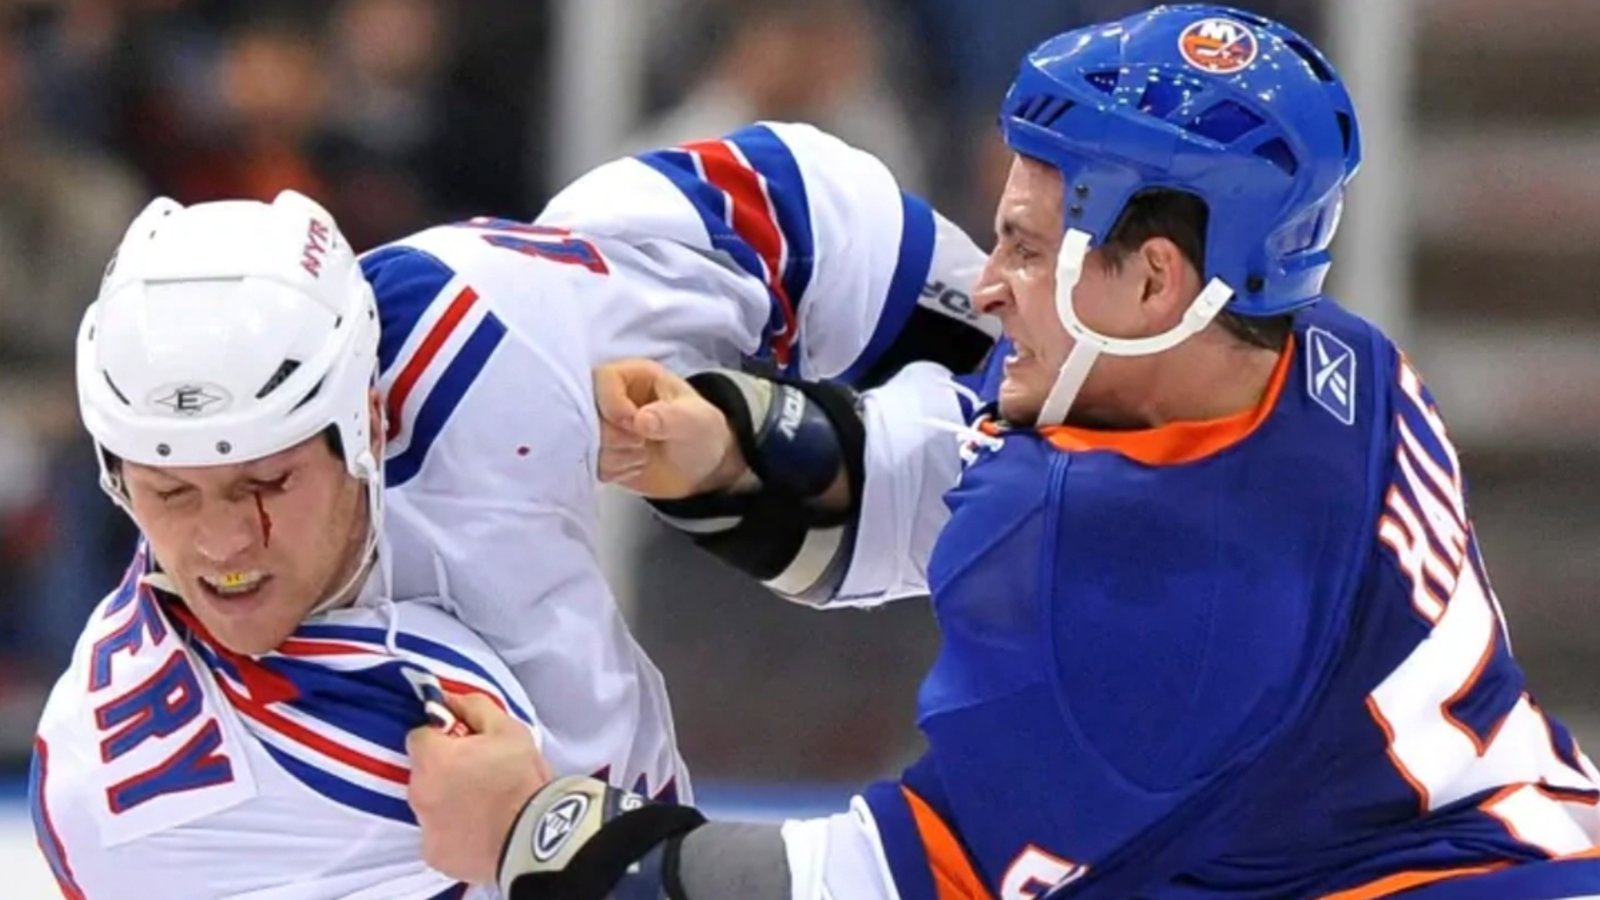 Sean Avery doubles down on Islanders hate, goes off in epic rant